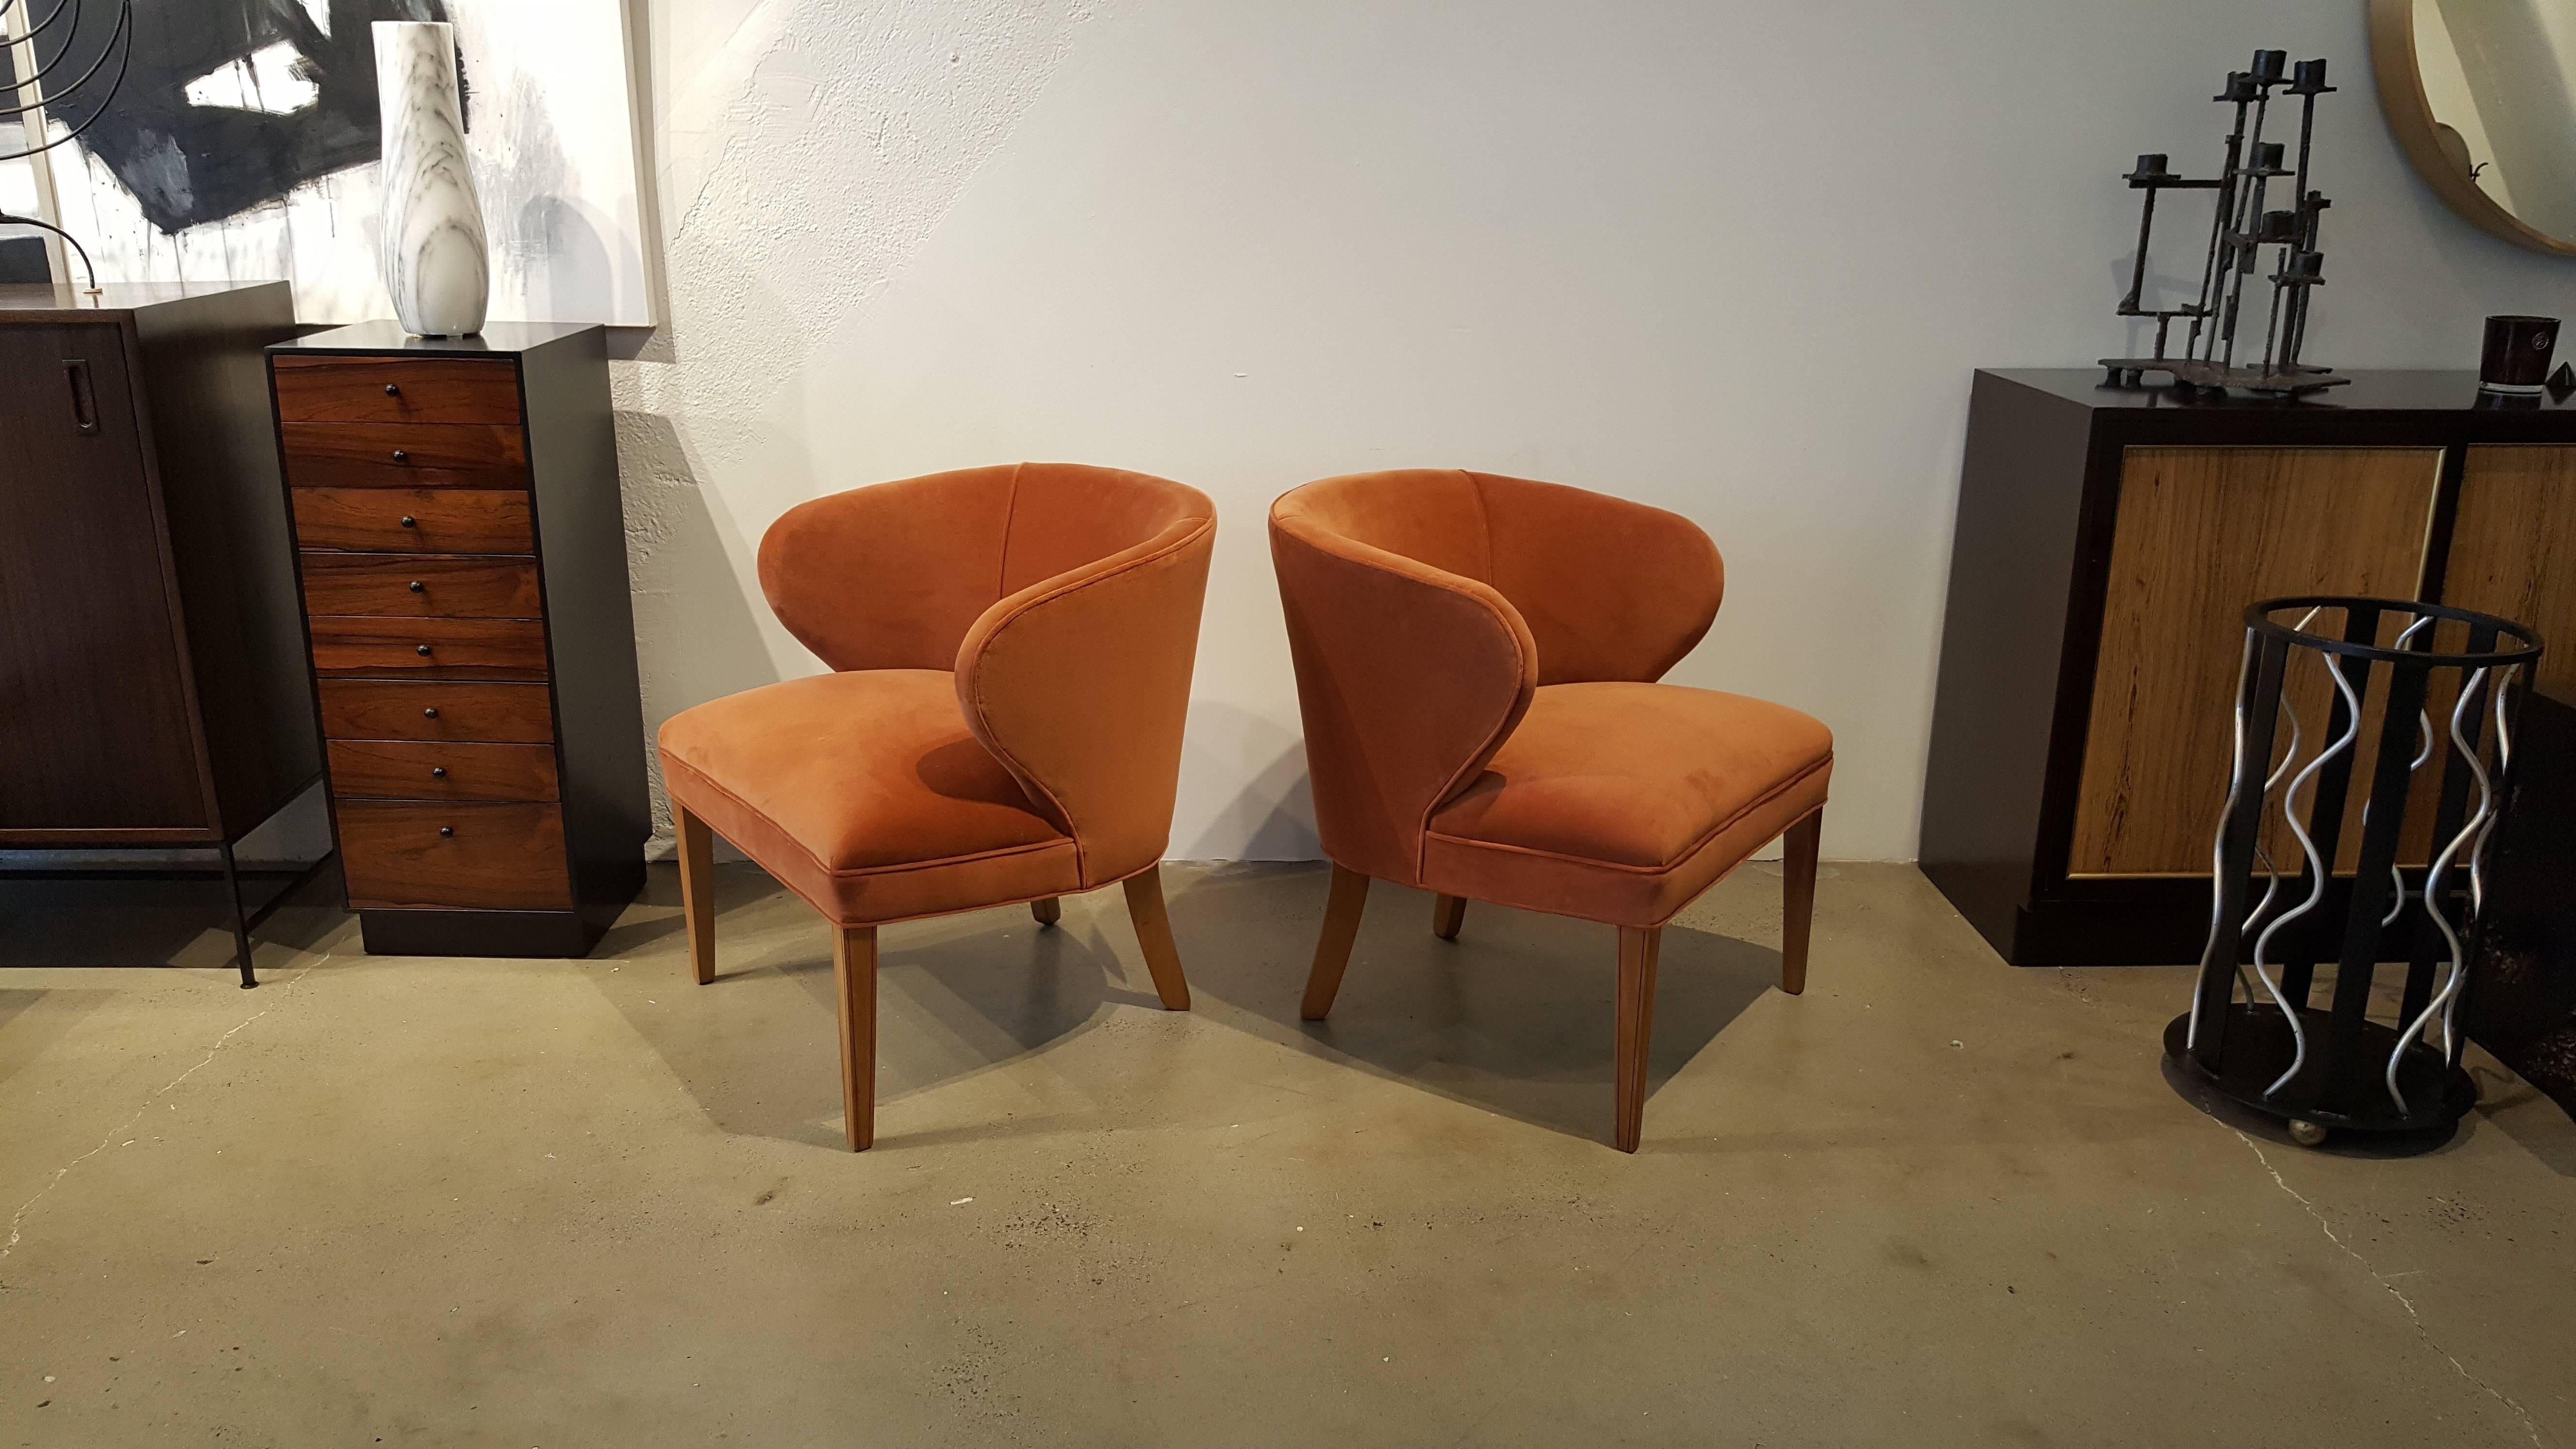 This item: Comfy Scandinavian Danish Modern armchairs in Apricot Velvet, 1960s.

Refine limited is a curated collection of Mid-Century, deco, Danish modern, and decorative designer furniture with a focus on period designs from the 1940s-1980s. Our